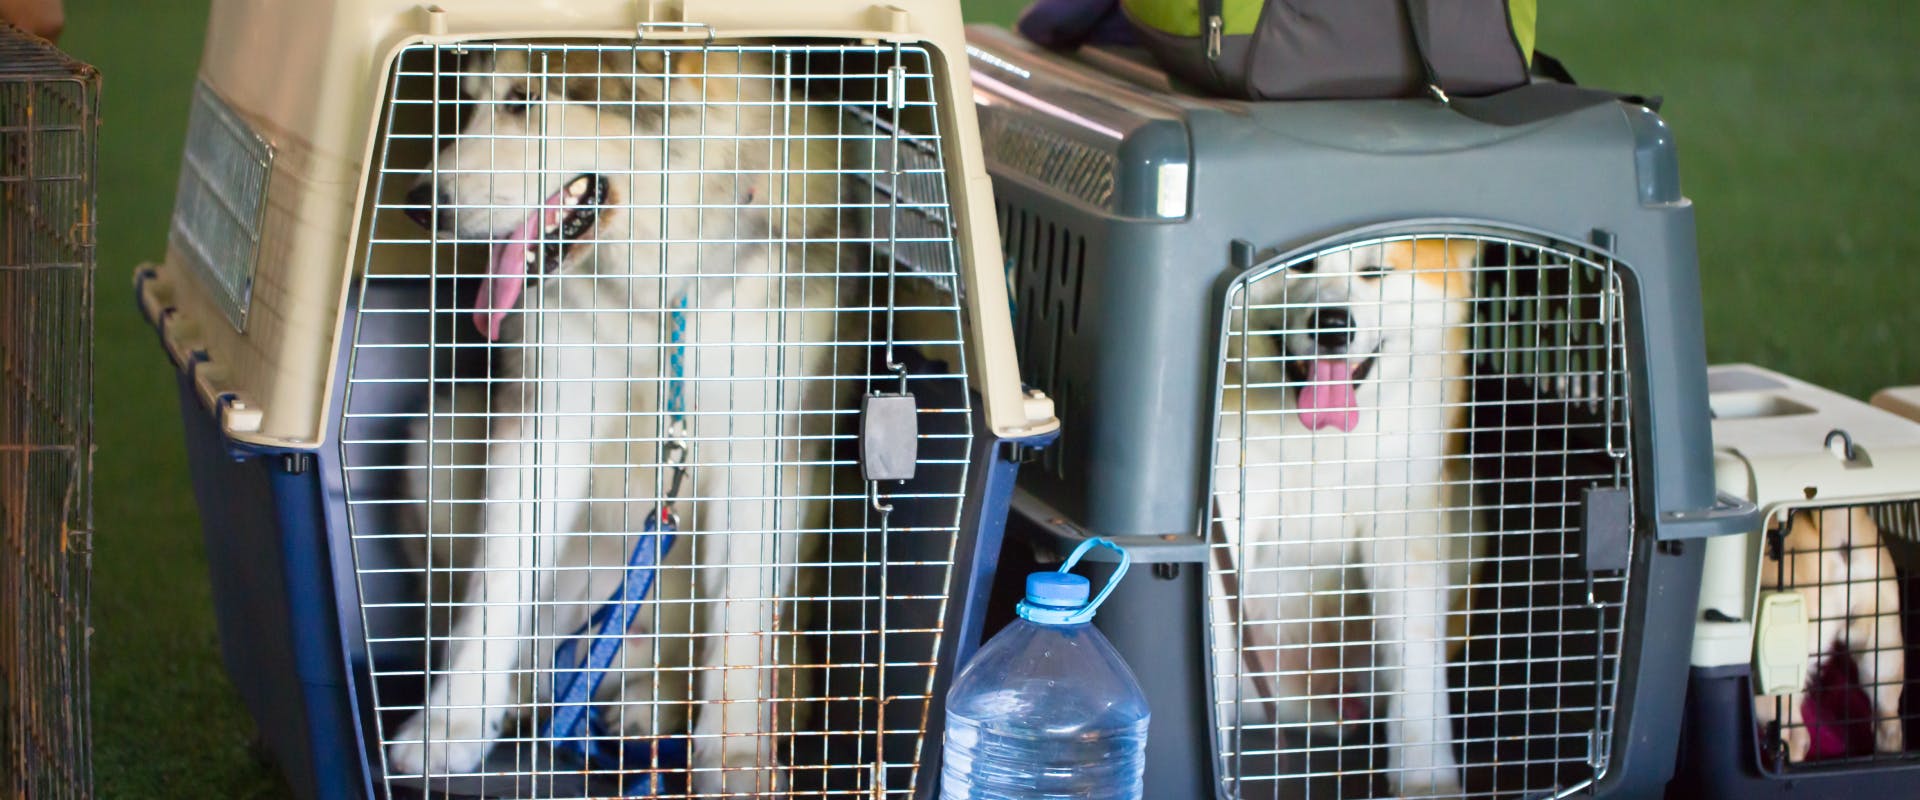 a large sized dog, a medium sized dog, and a small dog in each of their own dog travel kennels